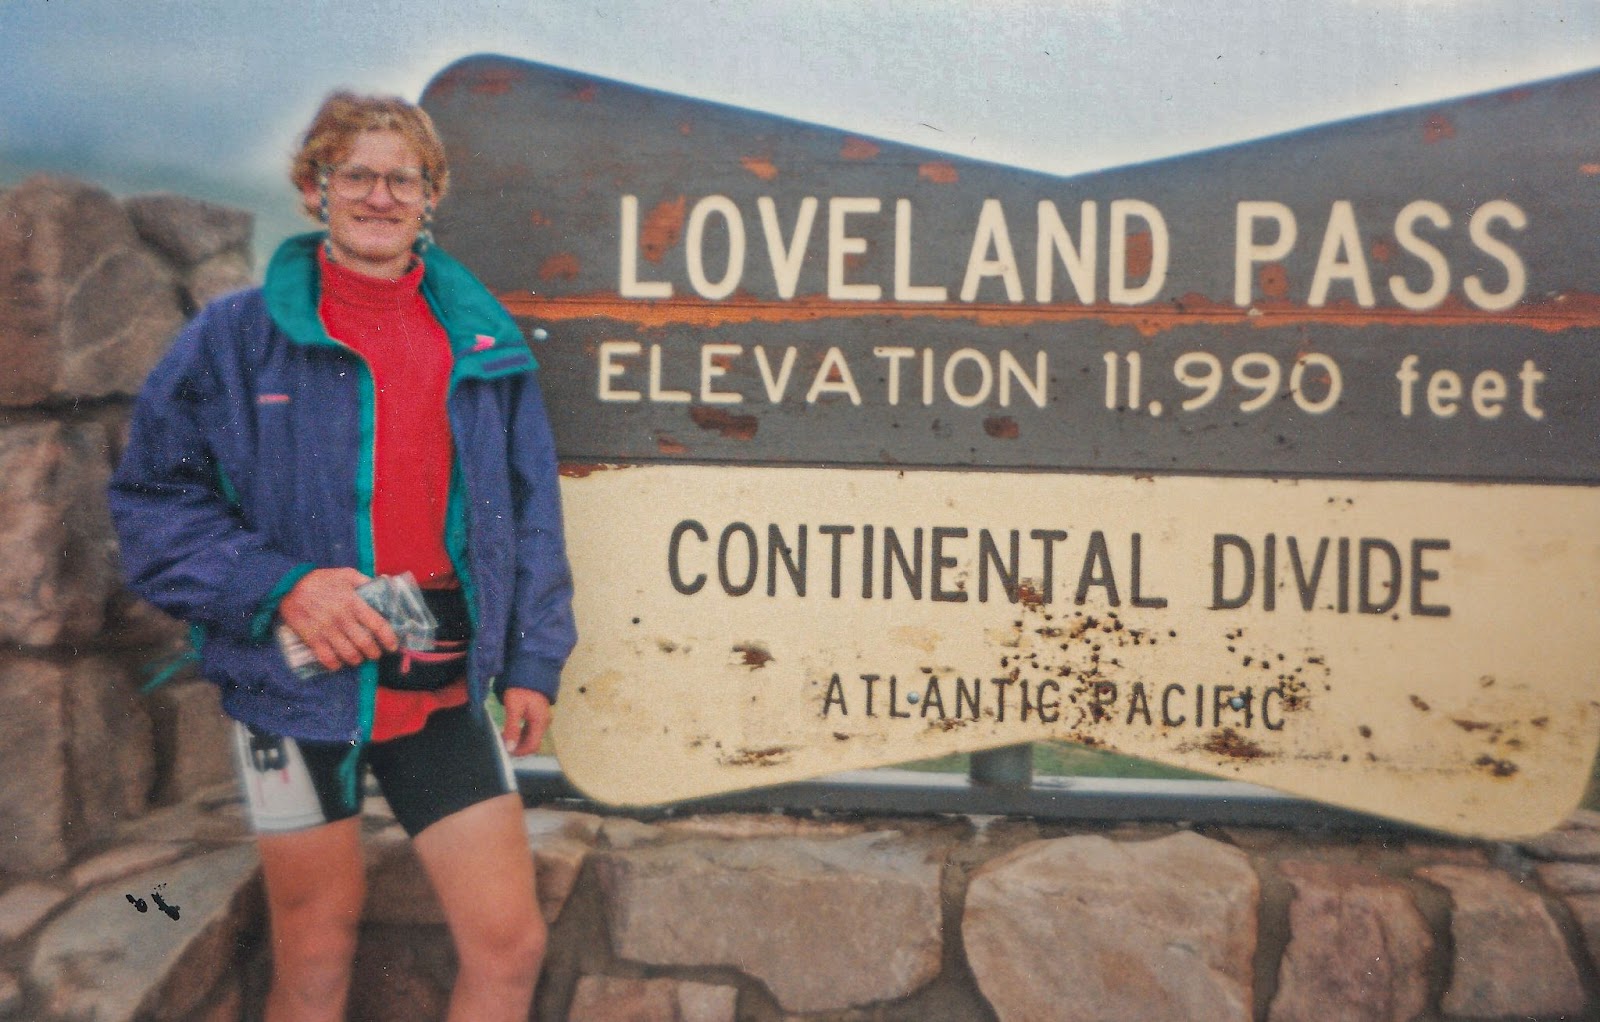 Man stands in coat with biking shorts by a sign that reads: LOVELAND PASS ELEVATION 11,990. CONTINENTAL DIVIDE ATLANTIC, PACIFIC